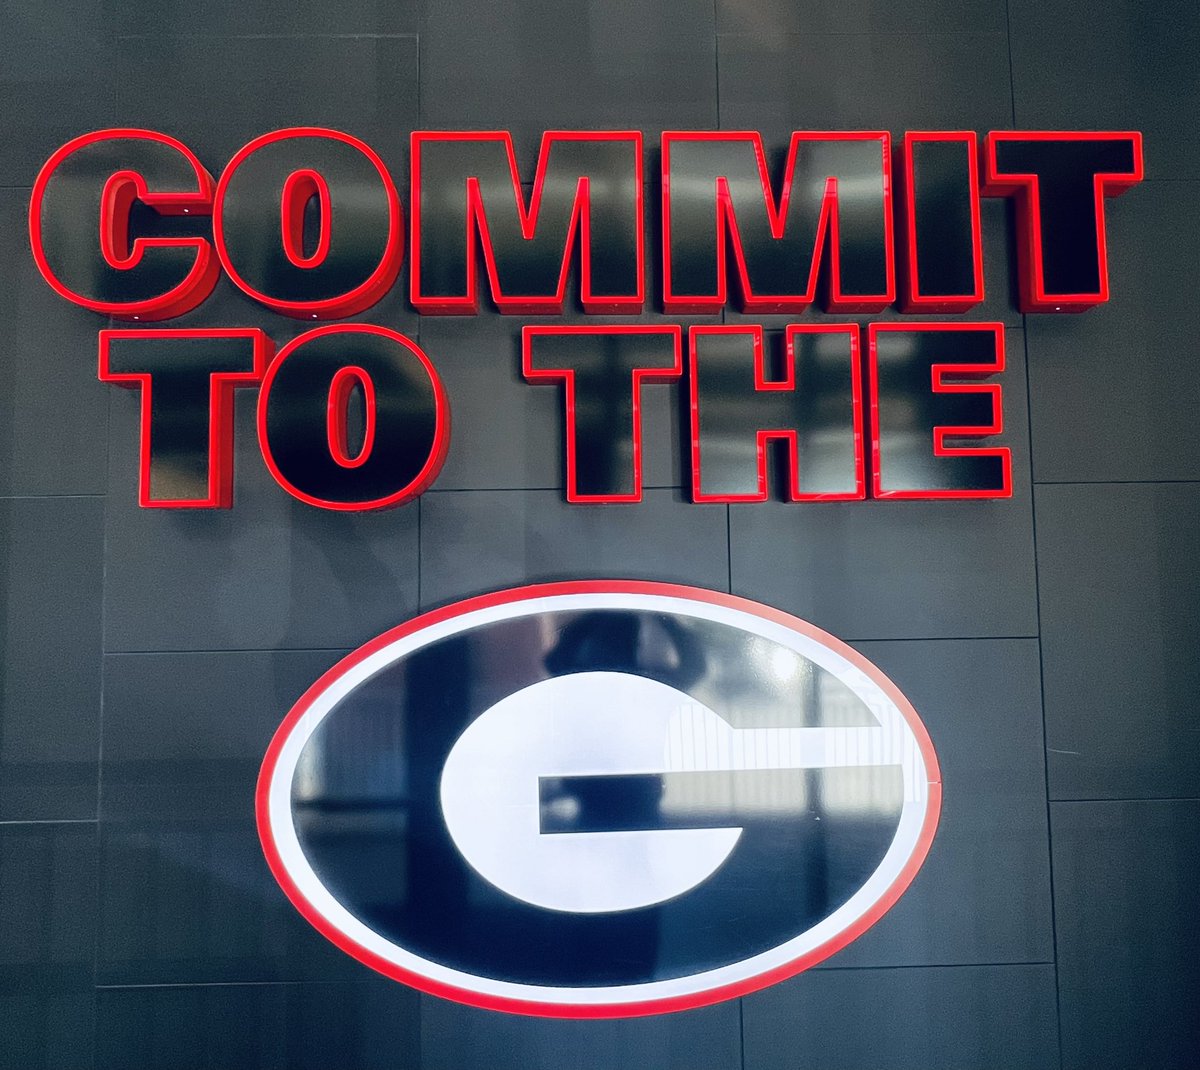 The narratives, stories, opinions.. all part of the noise you have to block out on the path to greatness. Elite competitors long for elite competition… period. Excited for the next chapter. It’s a marathon.. keep running the race kid. GO DAWGS! ⚫️🔴